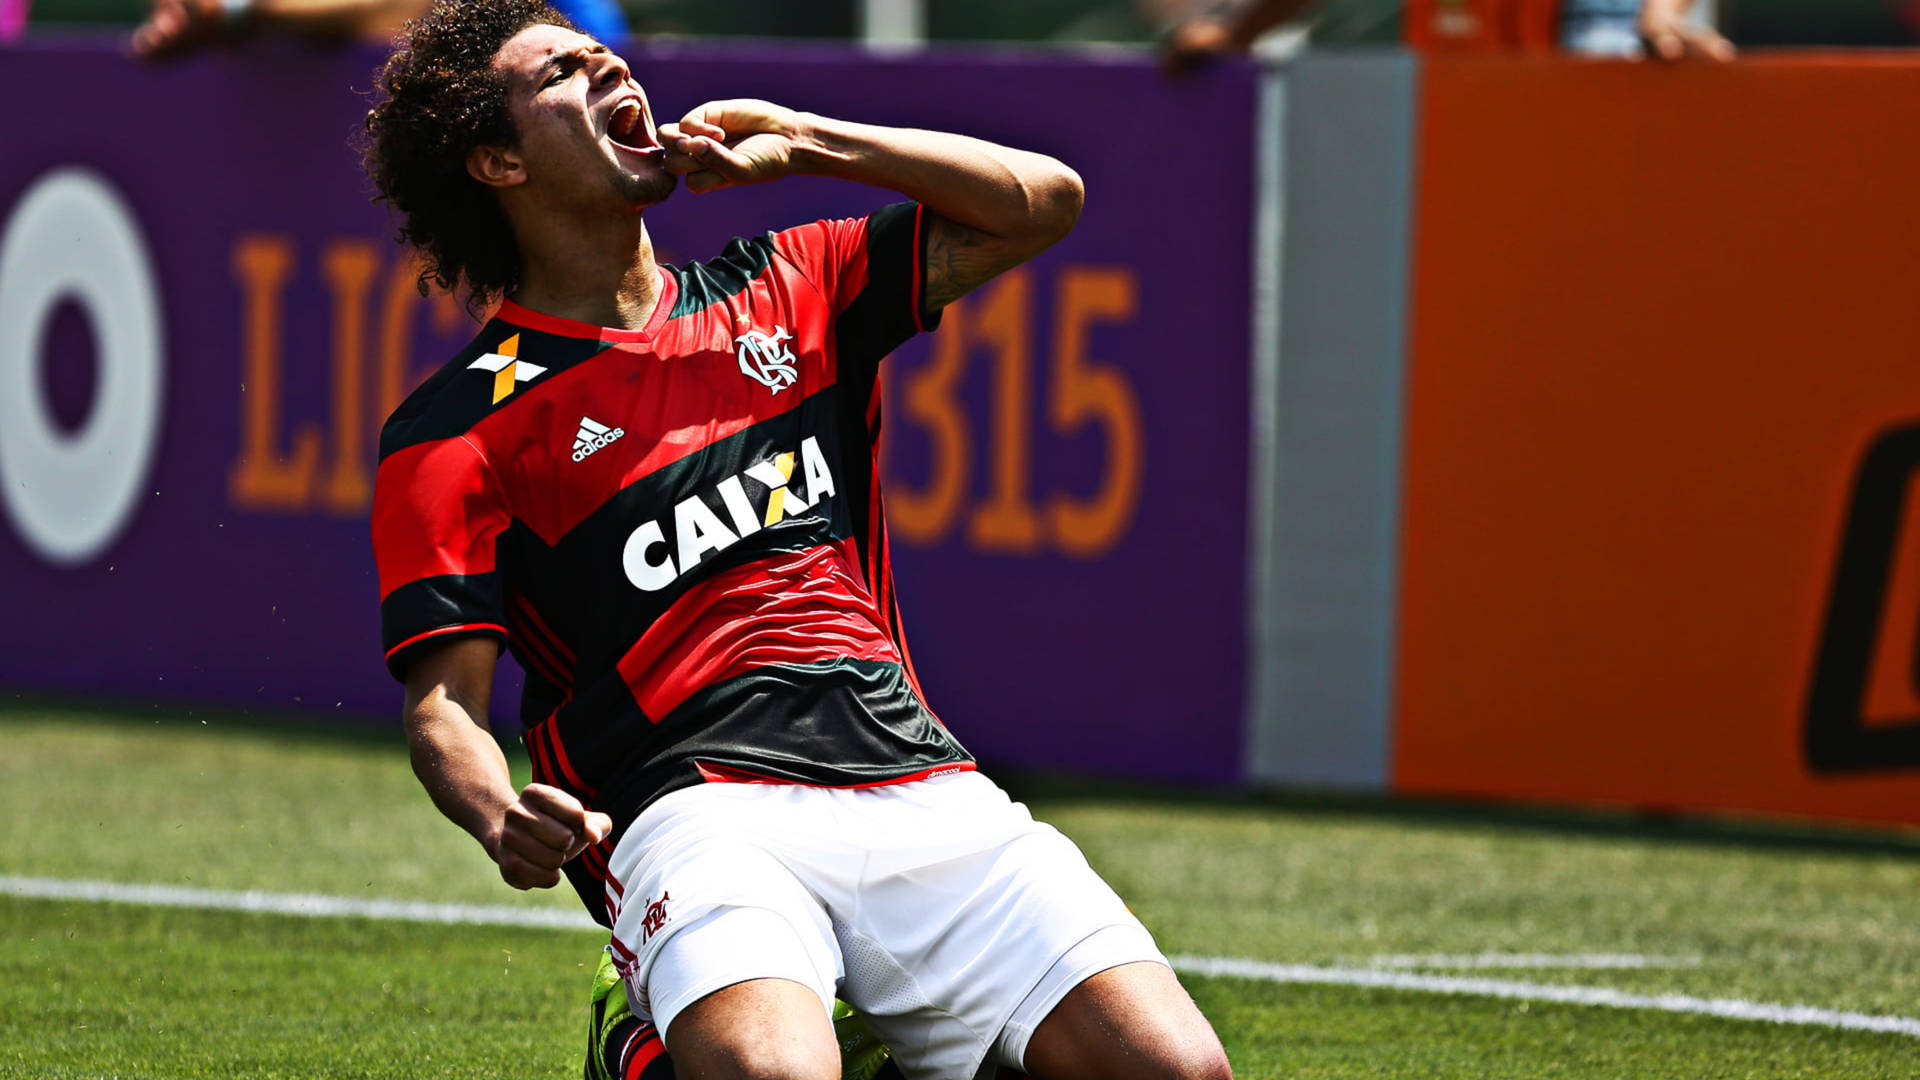 Flamengo Fc Star Player - Willian Arao In Action